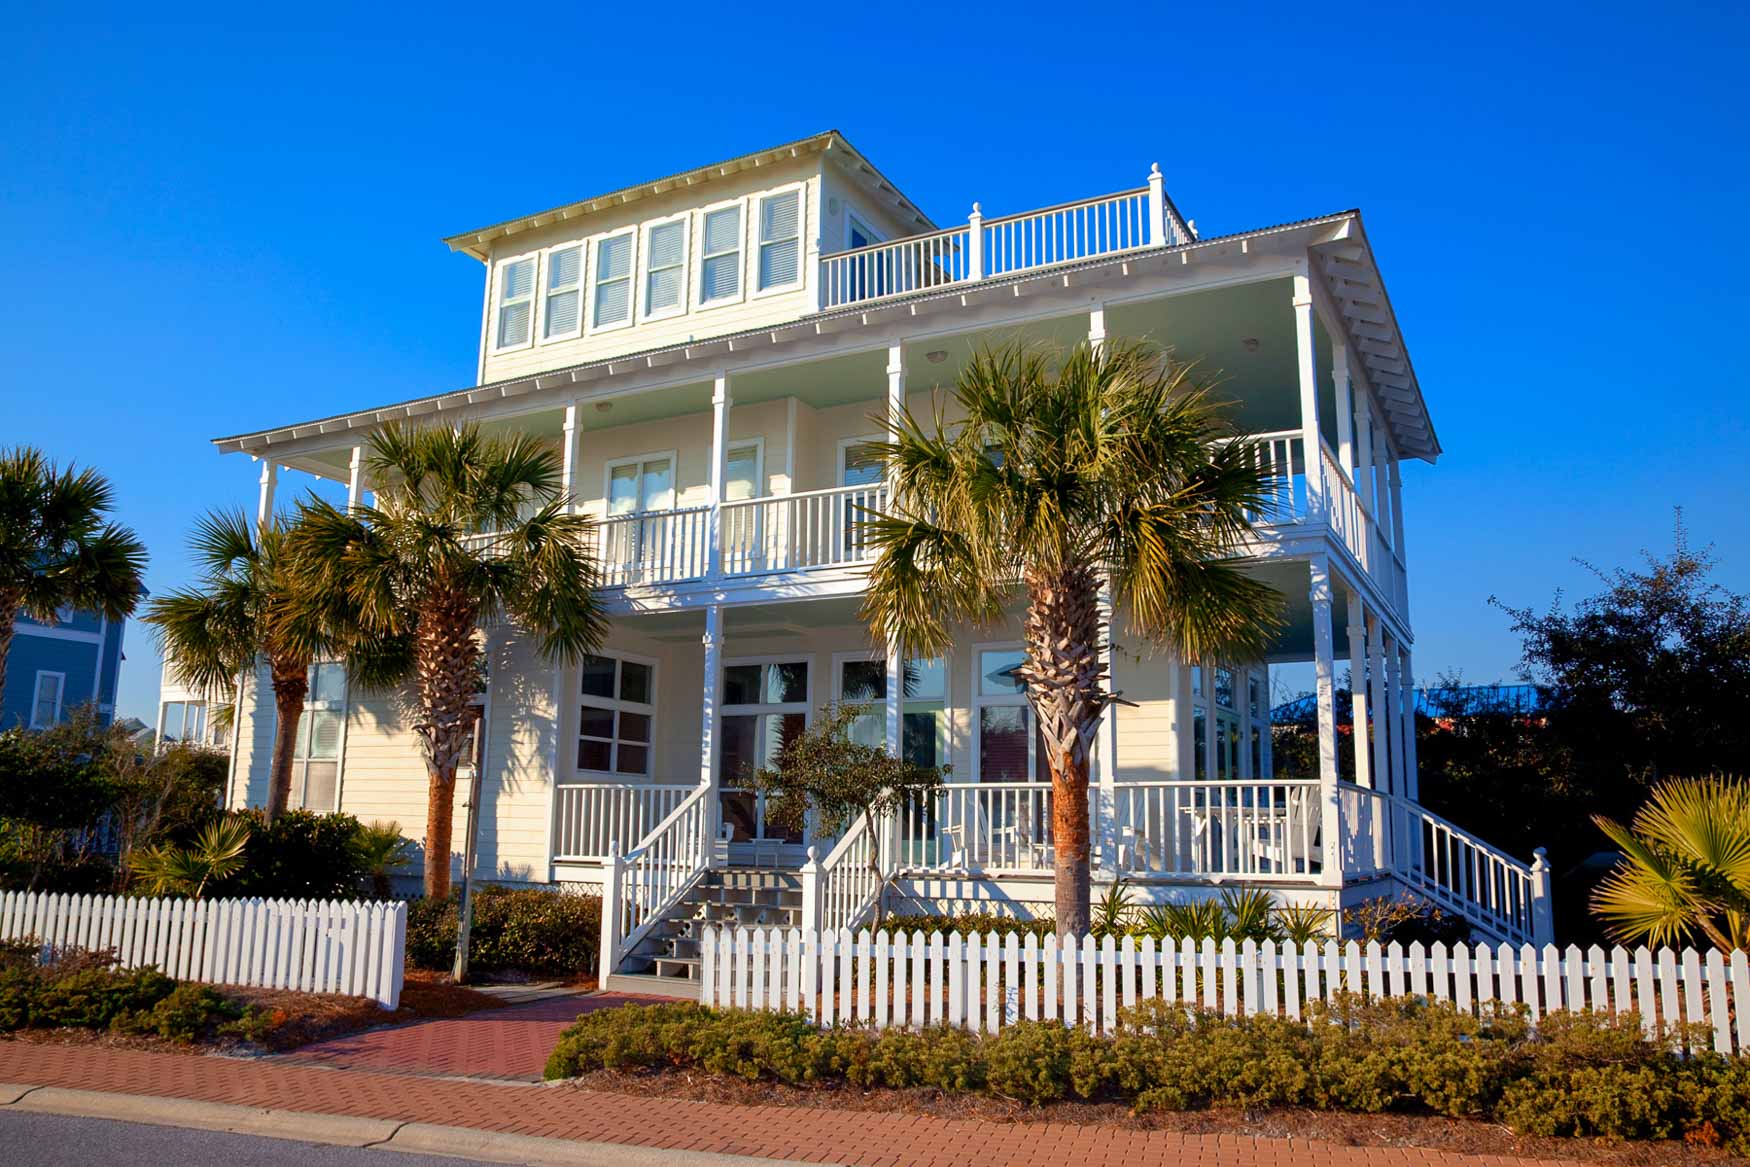 Road side view of two story beach home with 3rd floor tower room in Old Florida Beach on 30A.